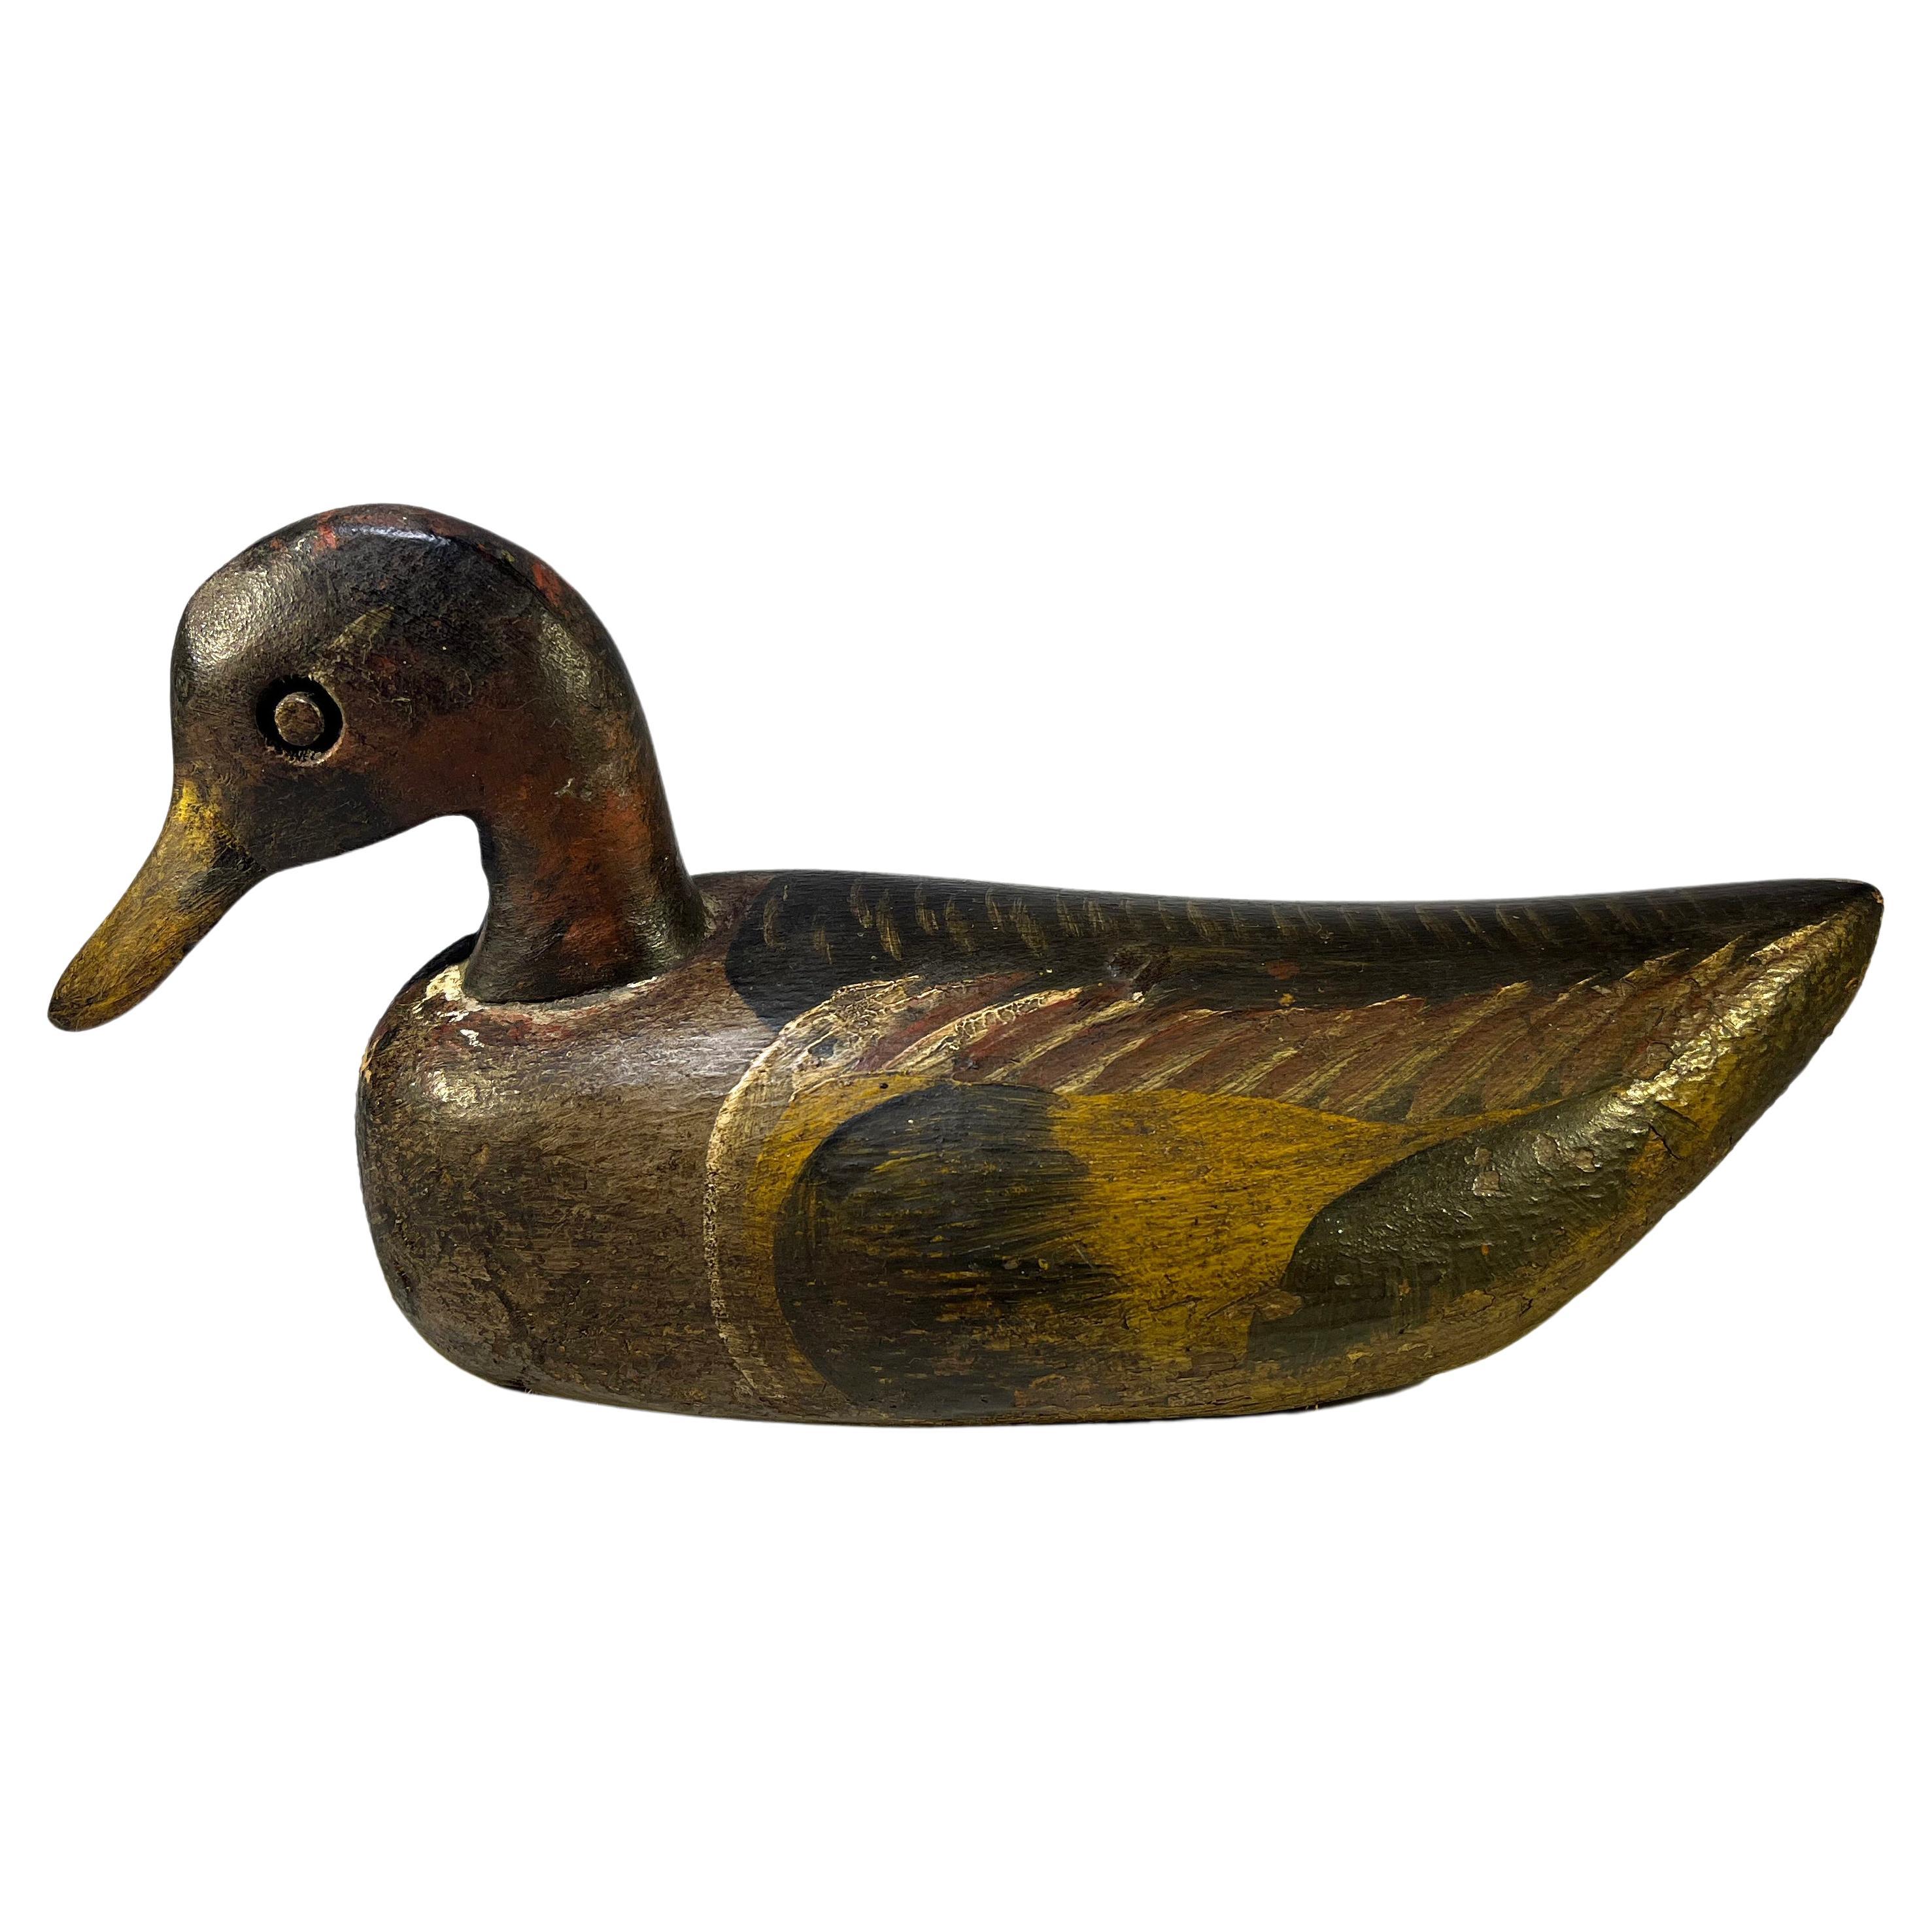 English Cork Waterfowl Decoy, Hand Crafted Painted Antique, Early 20th Century